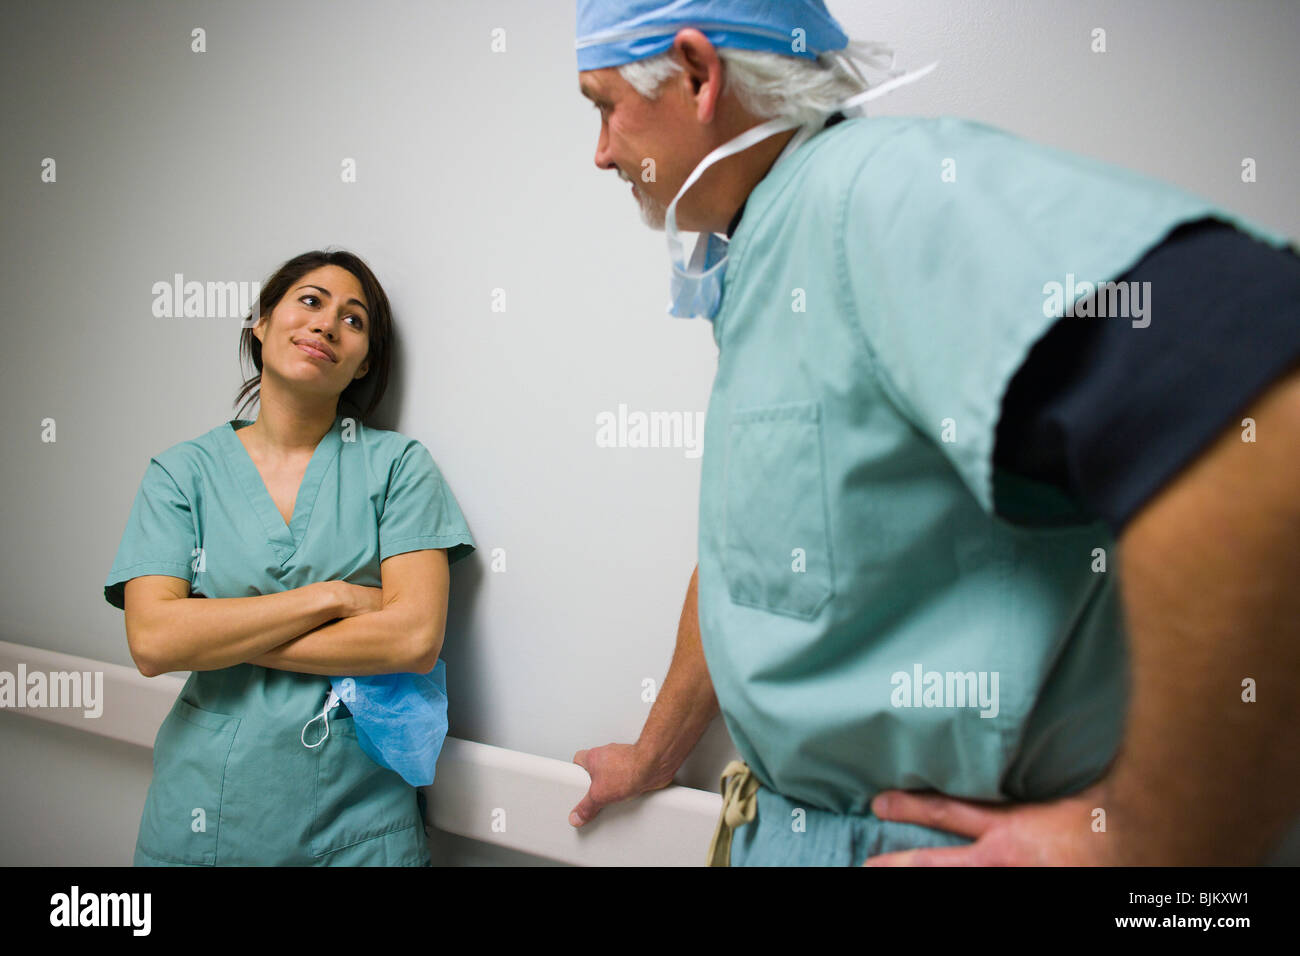 Doctor and nurse in scrubs talking Stock Photo